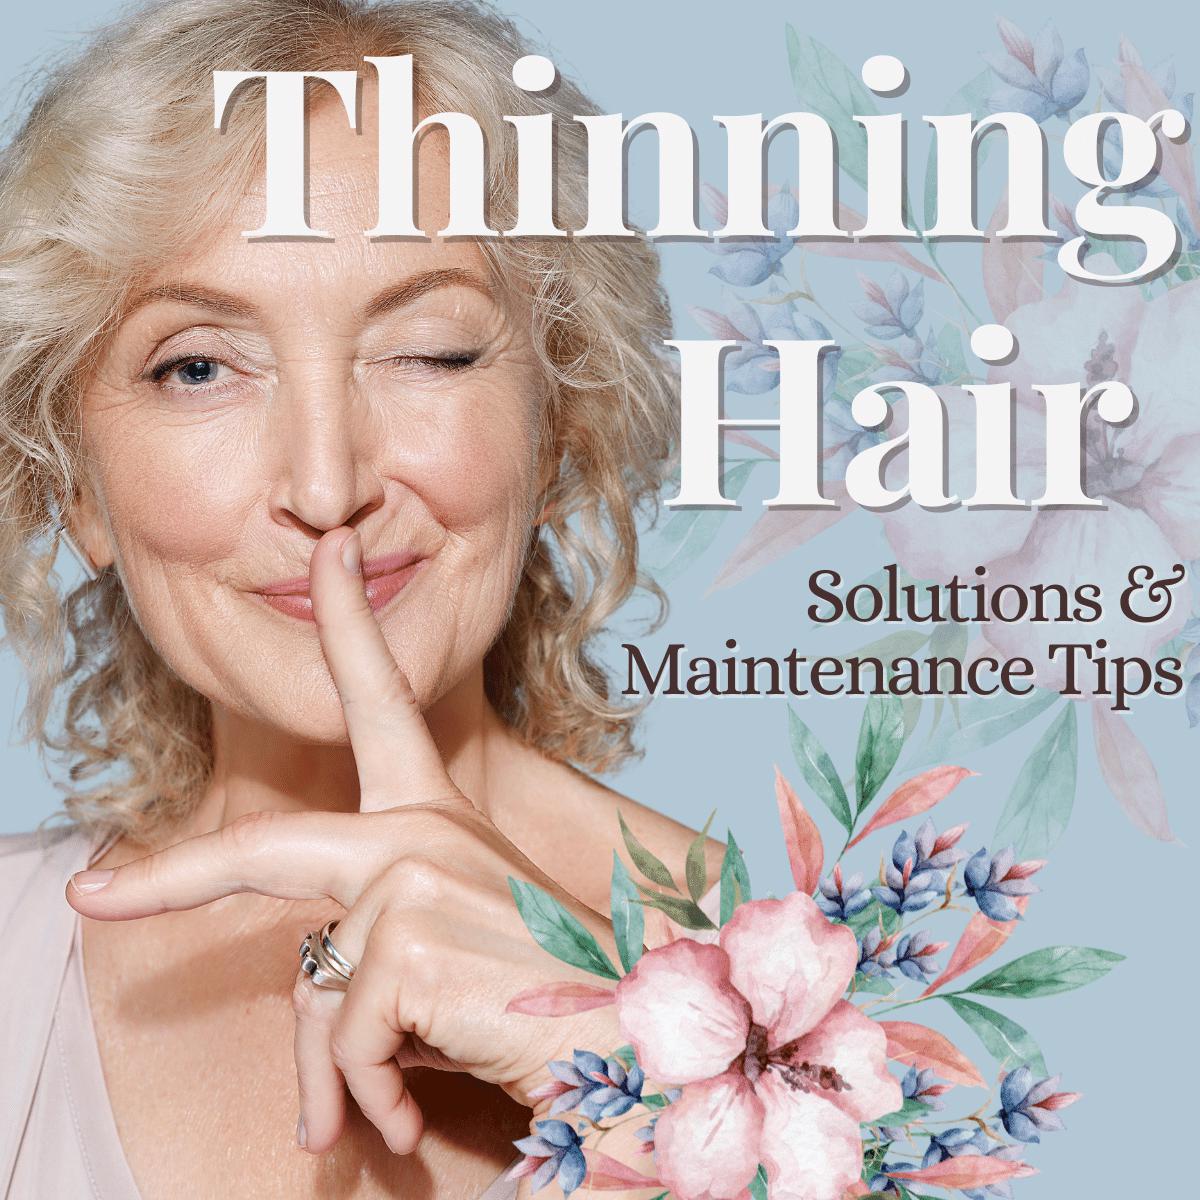 Thinning Hair – Solutions & Maintenance Tips